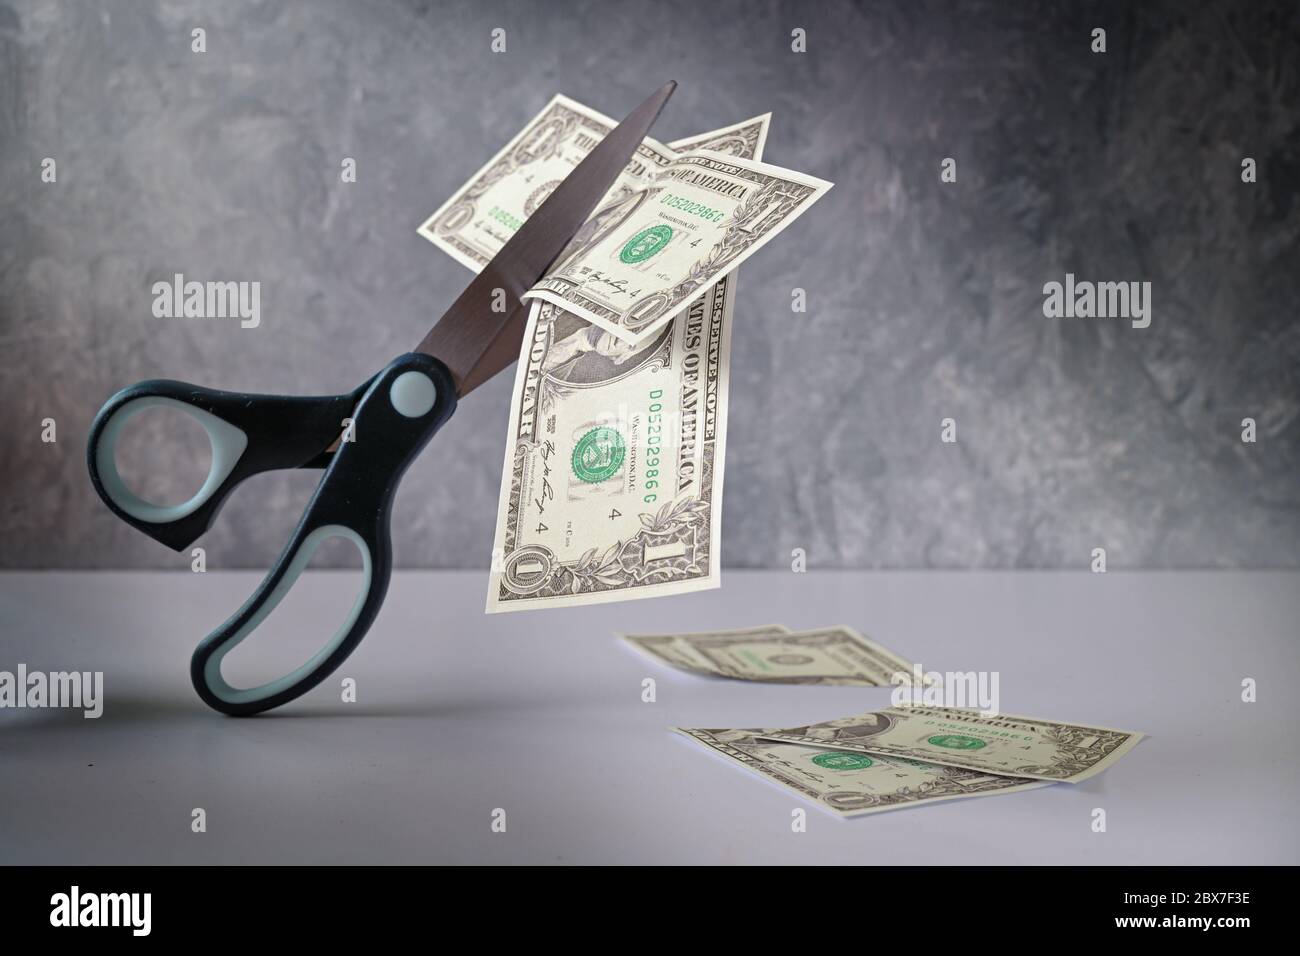 Business concept, one Dollar banknote is cut with scissors, metaphor for income reduction during coronavirus crisis, gray background, copy space, sele Stock Photo